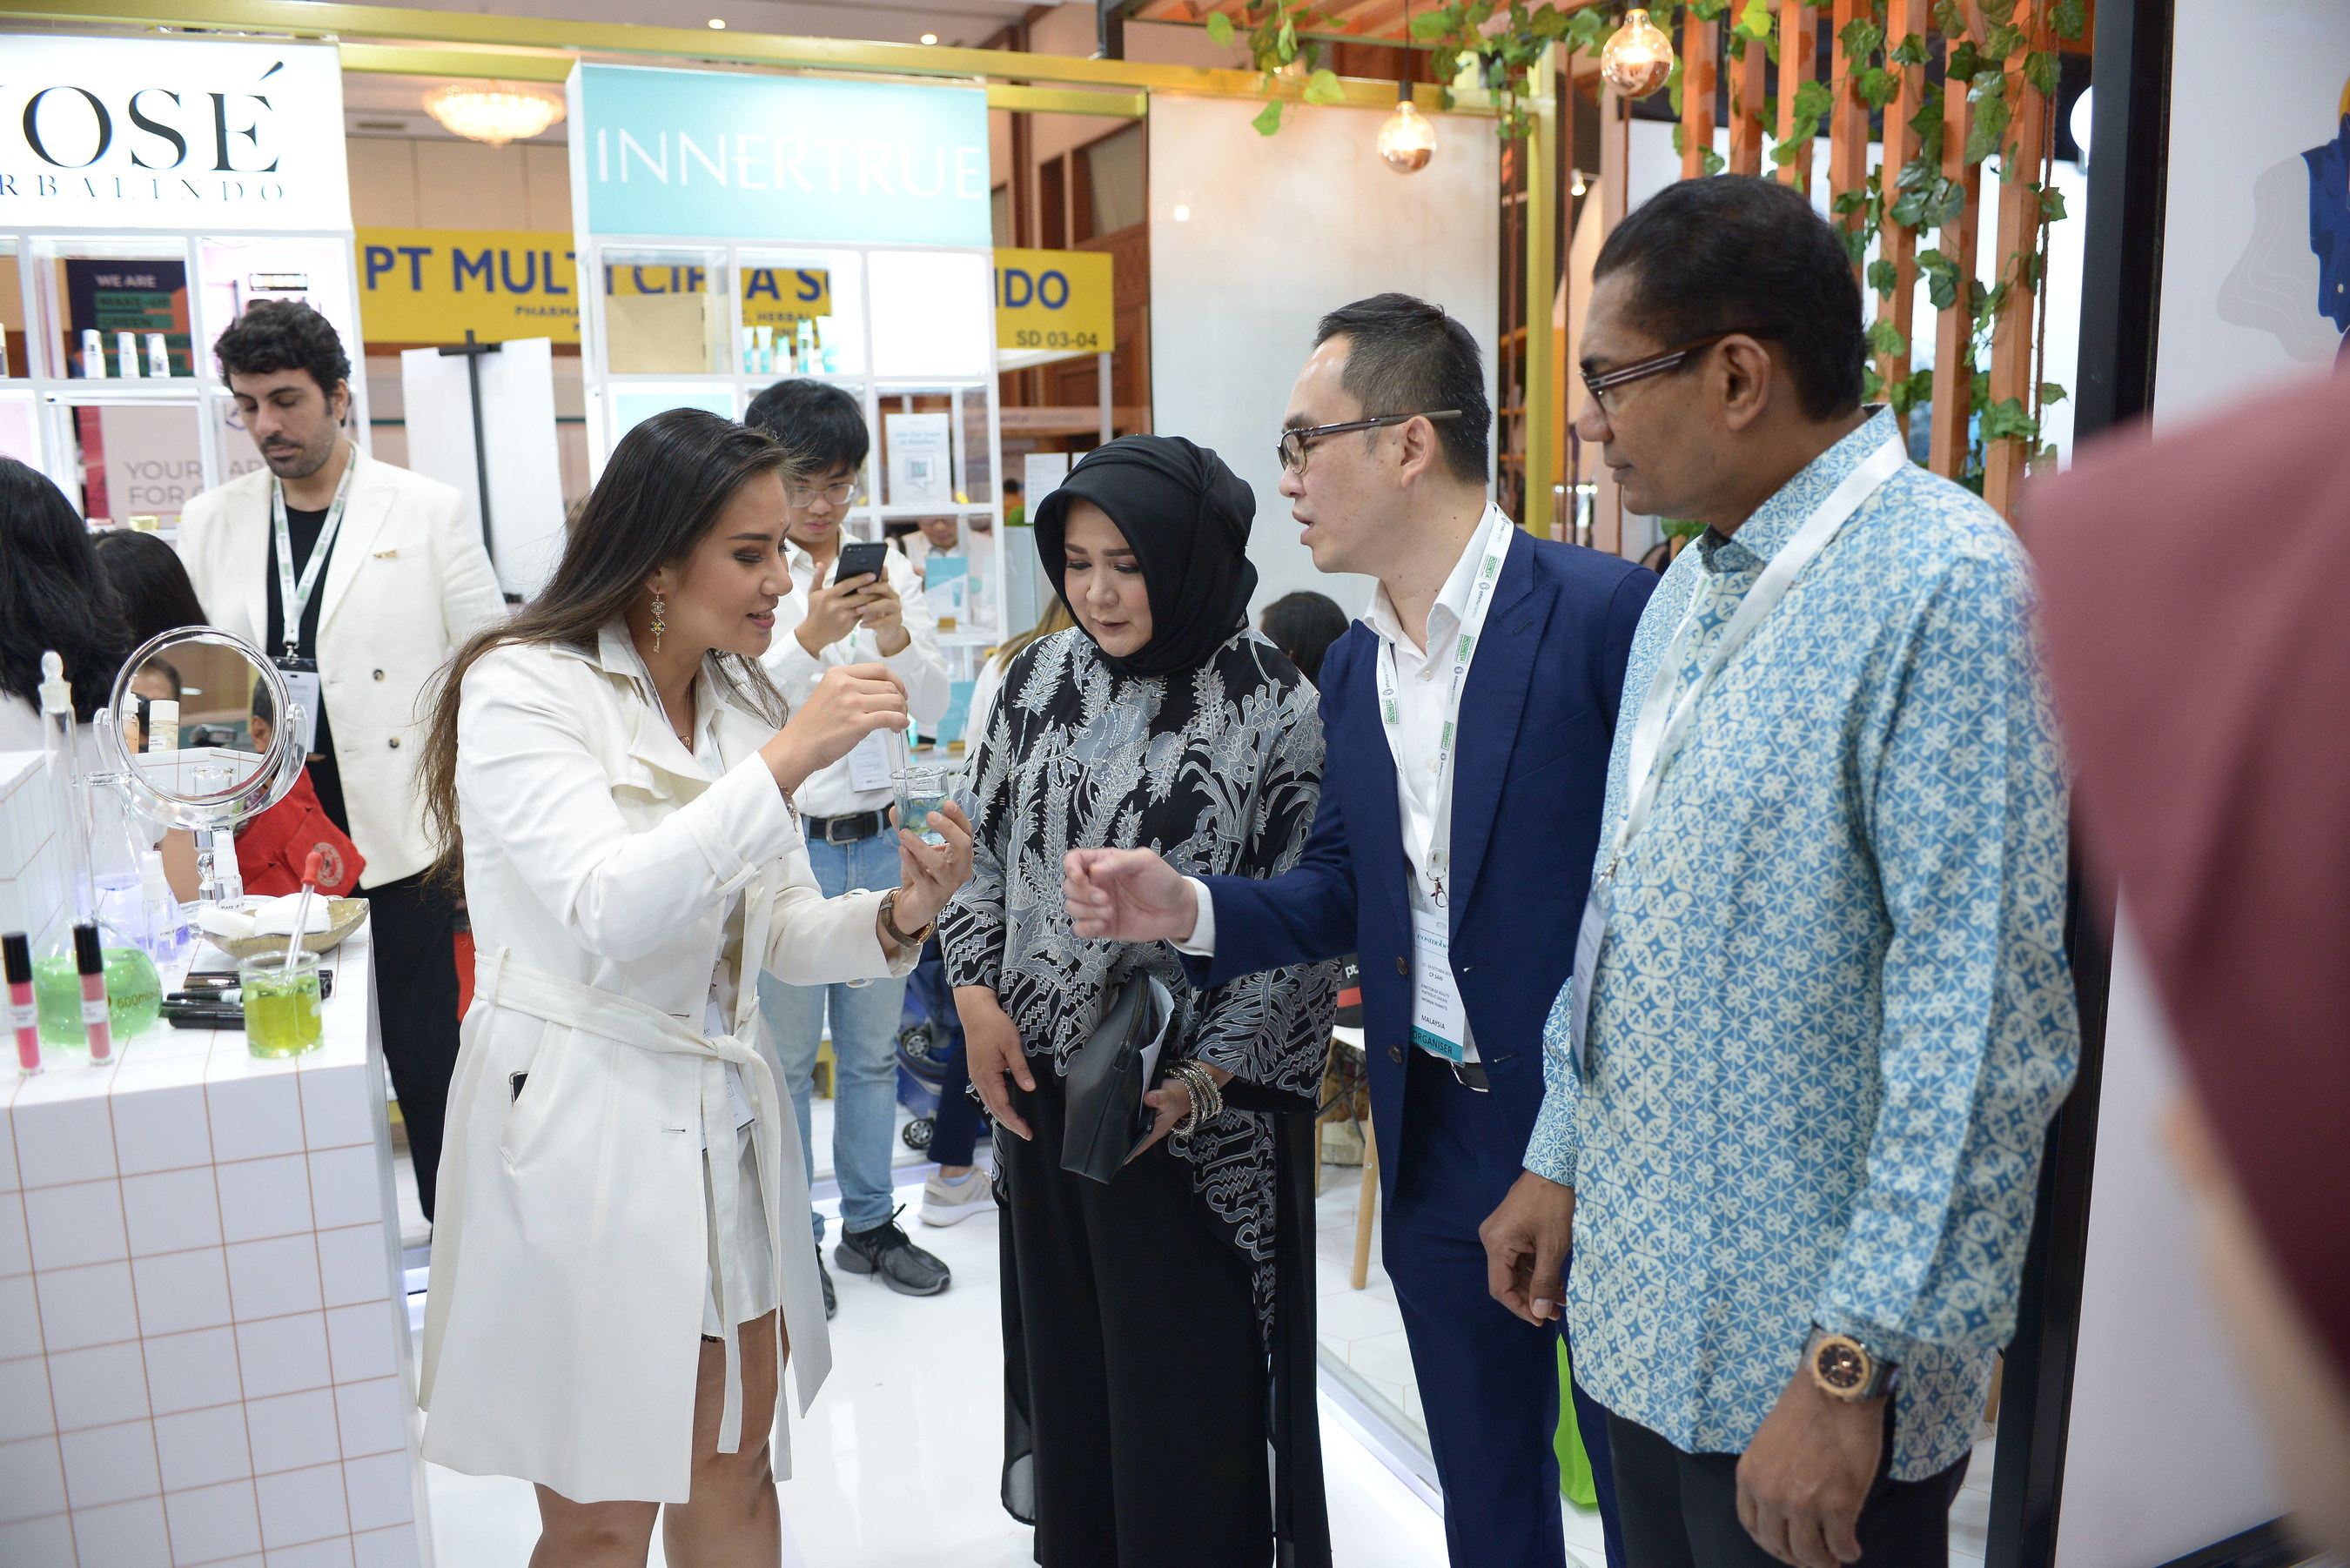 Cosmobeauté Indonesia 2019 Helps Raise Locally Made and Eco-Friendly Beauty Products